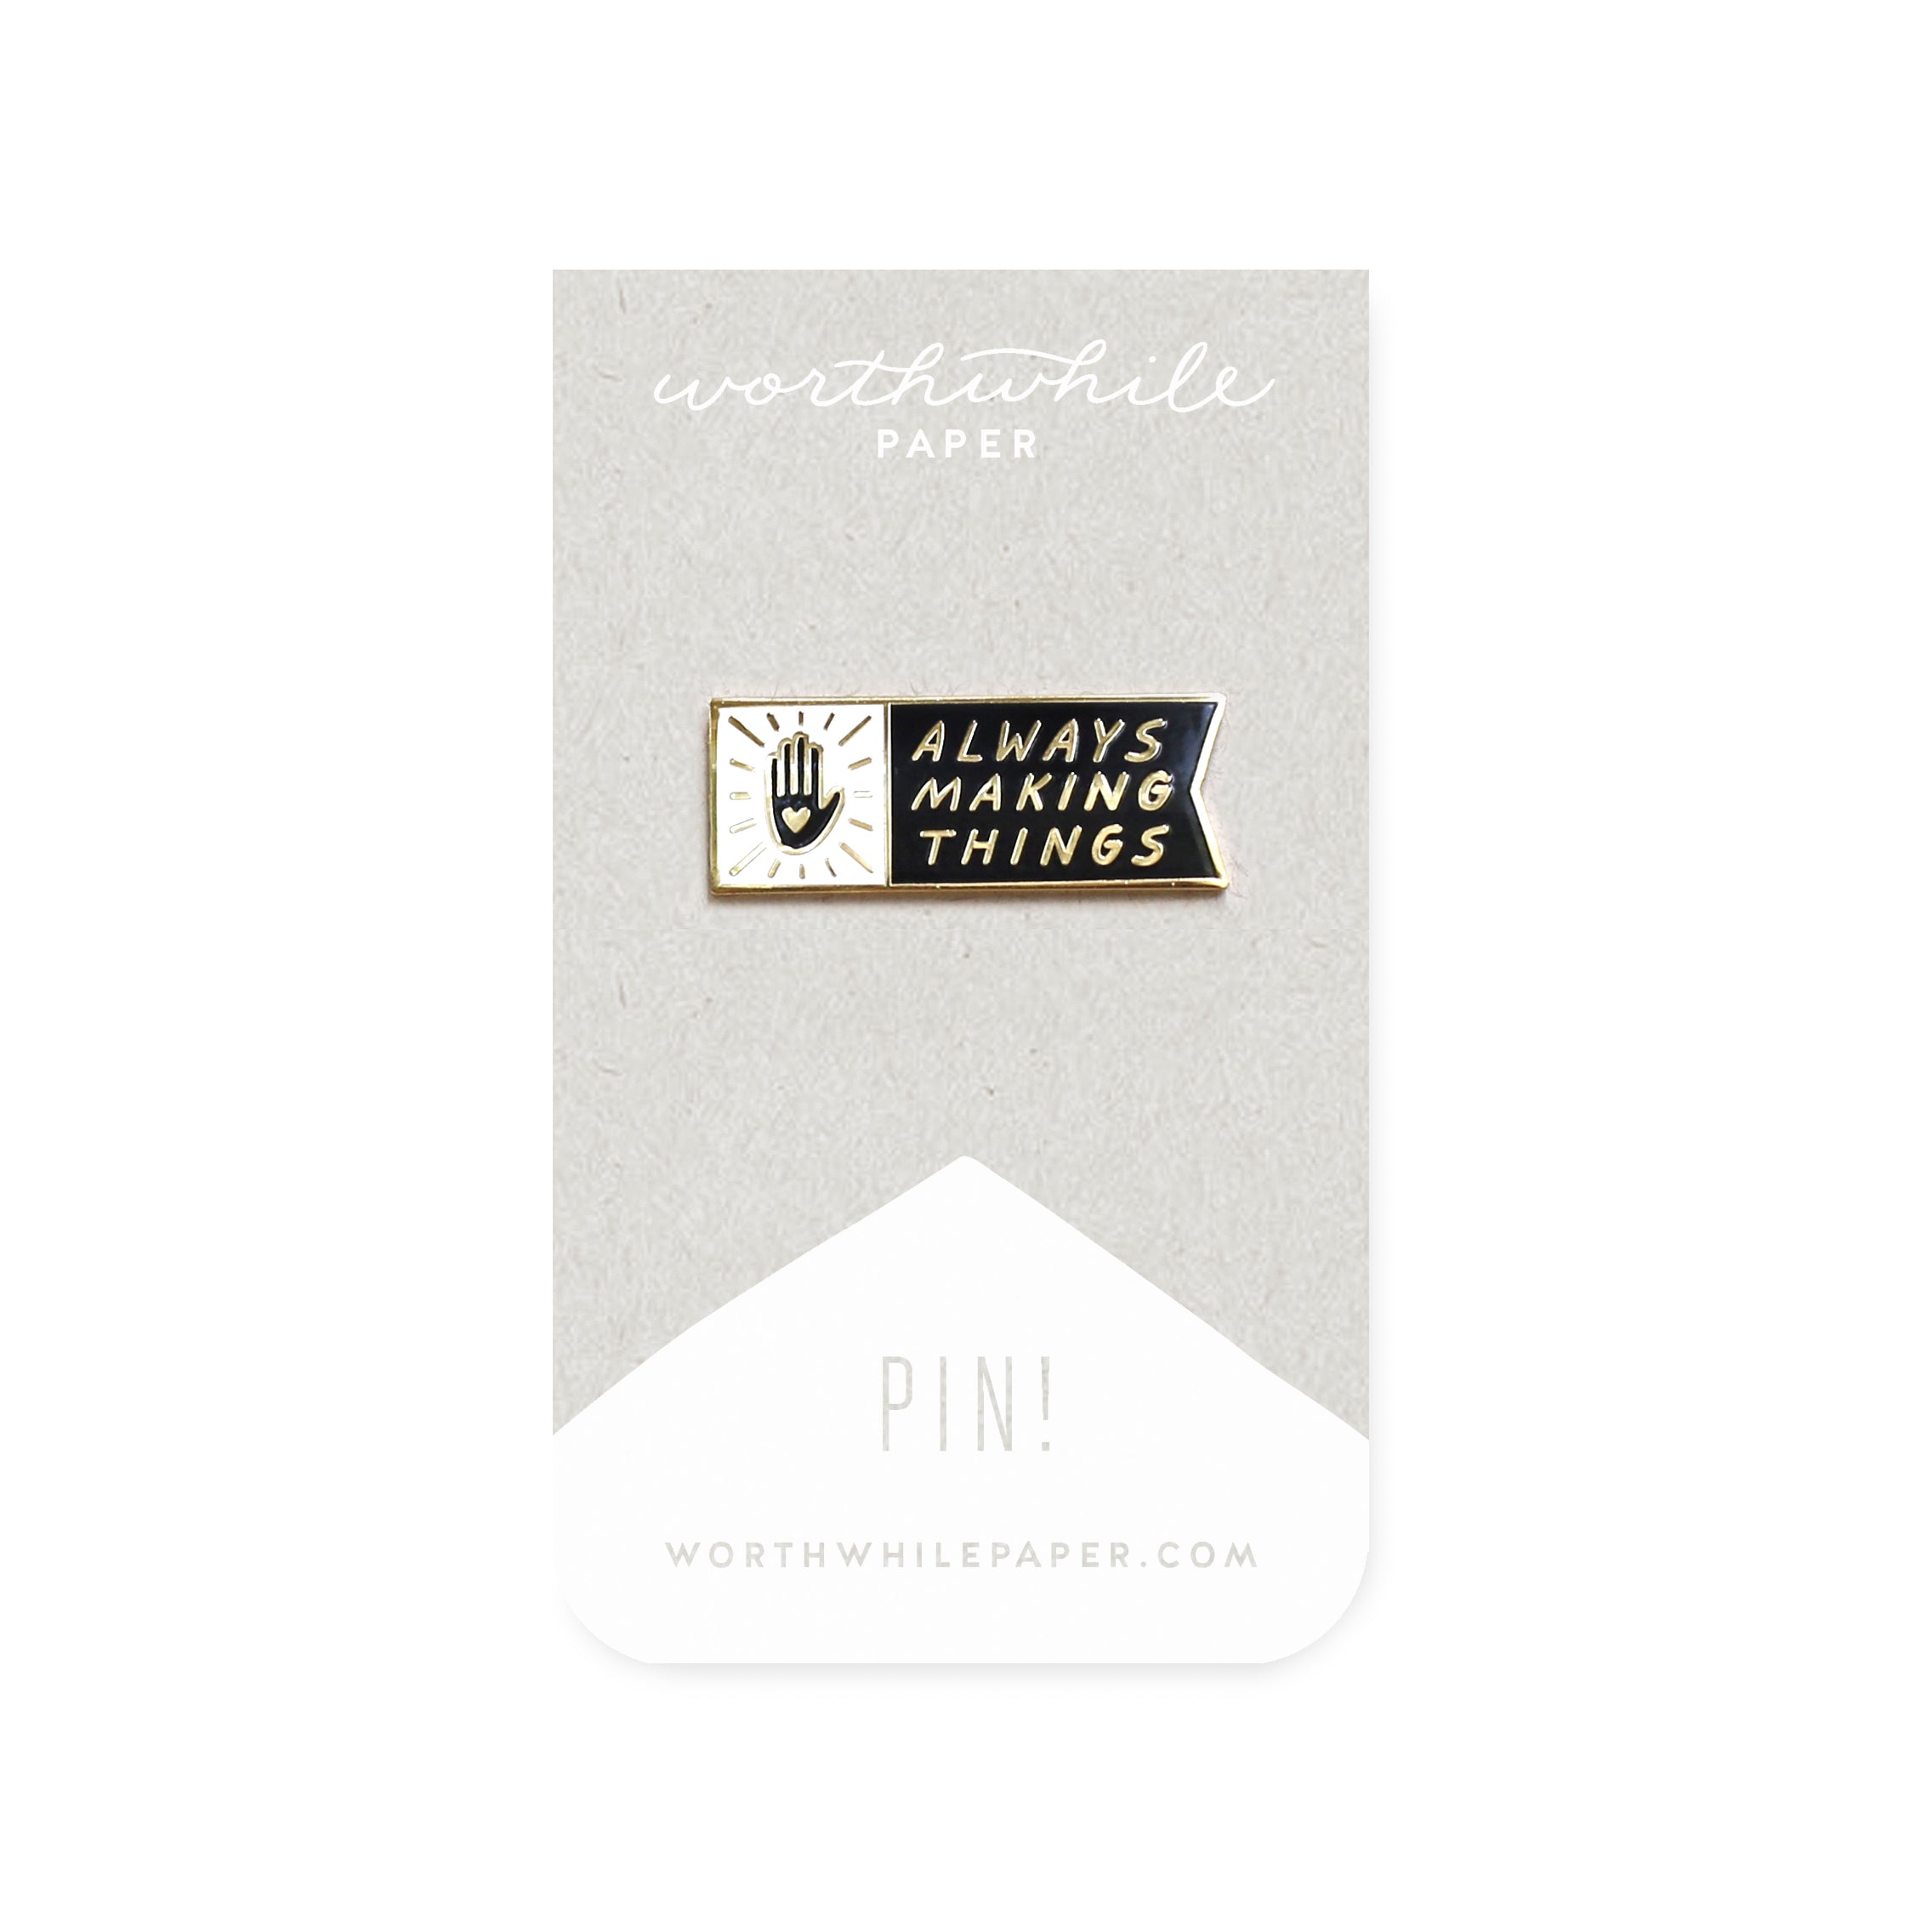 Pin on Things I Want